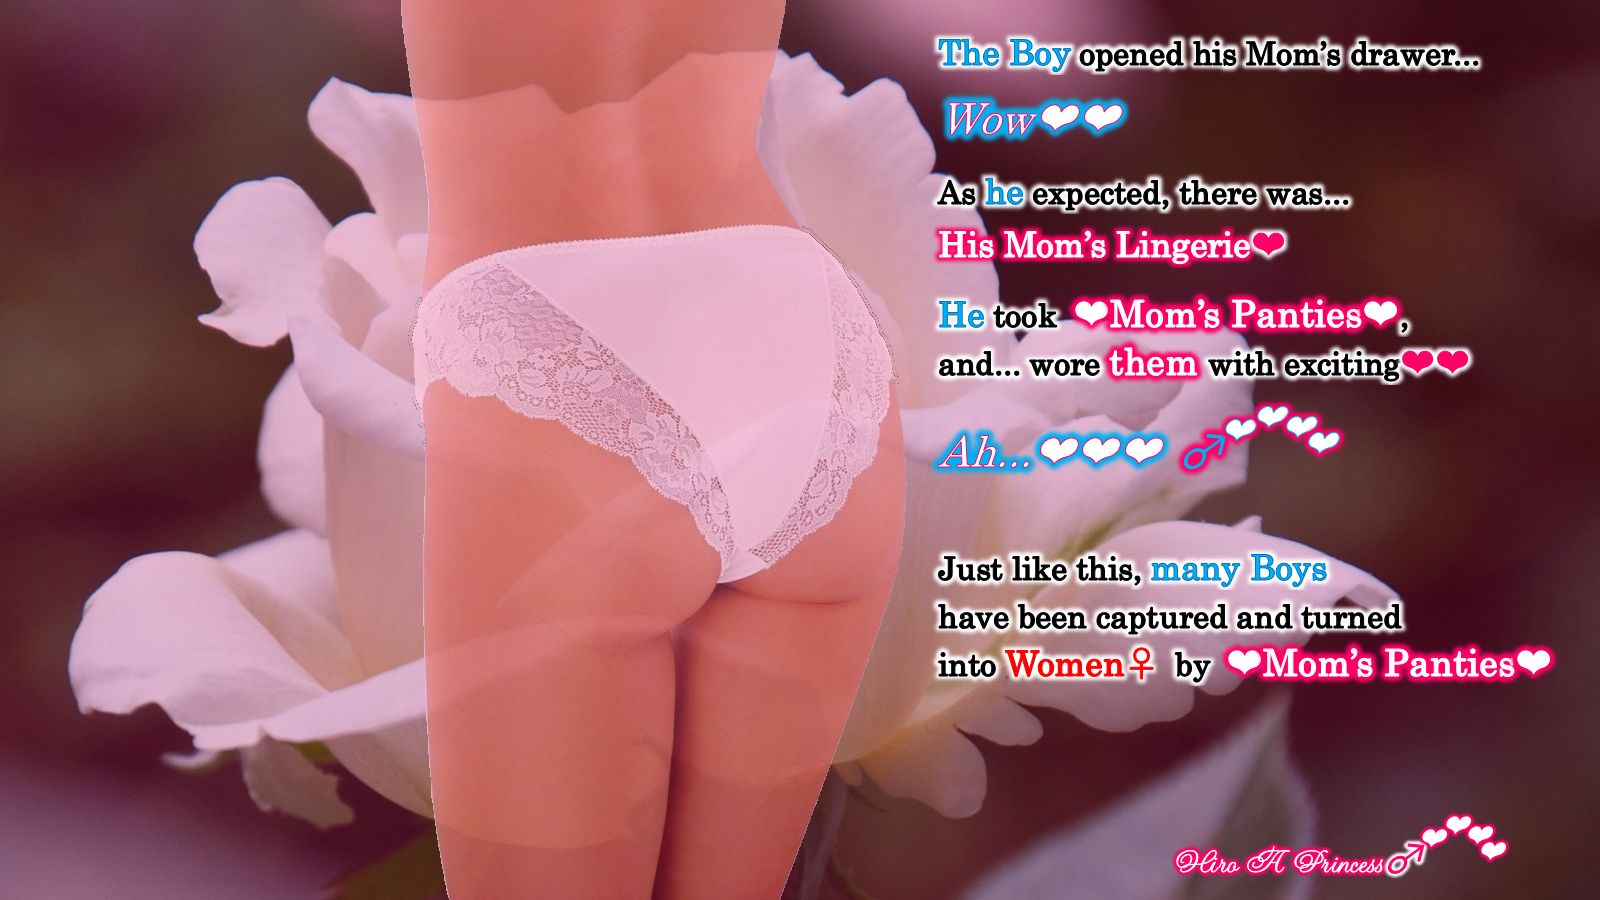 Many Boys have been captured and turned into Women by Mom’s Panties E